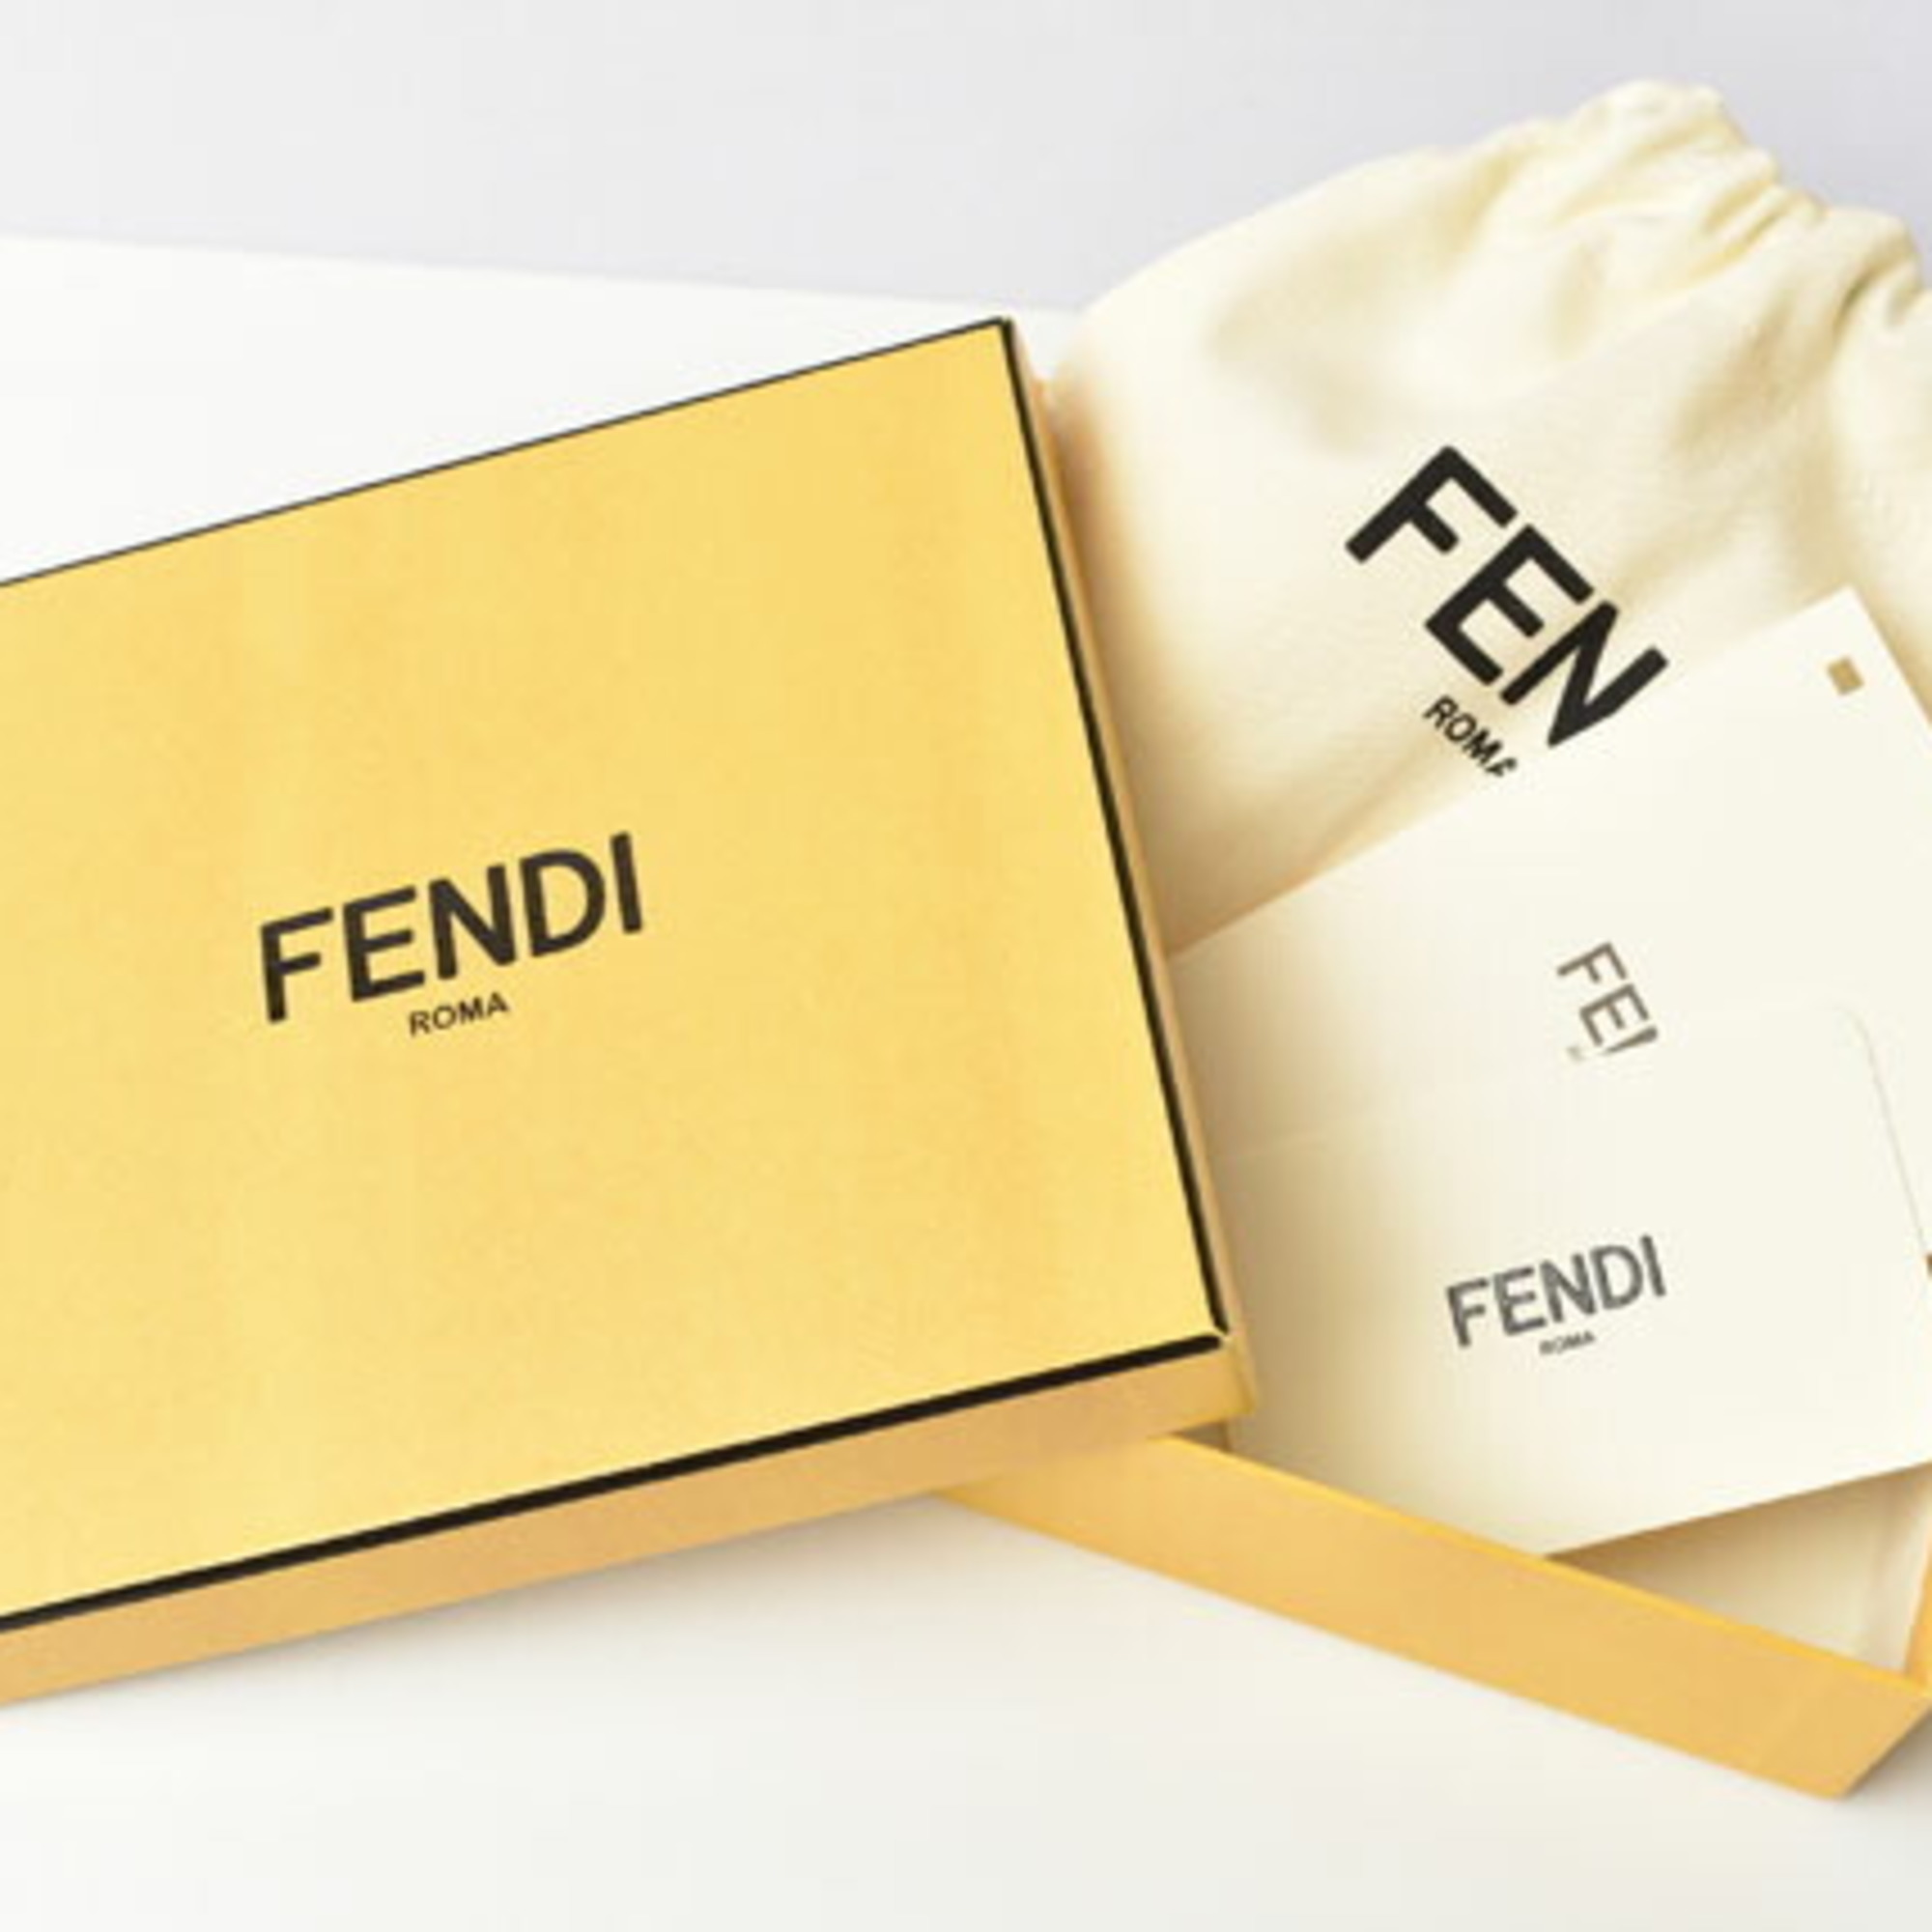 FENDI wallet fold BY THE WAY calf leather ROSE 8M0387